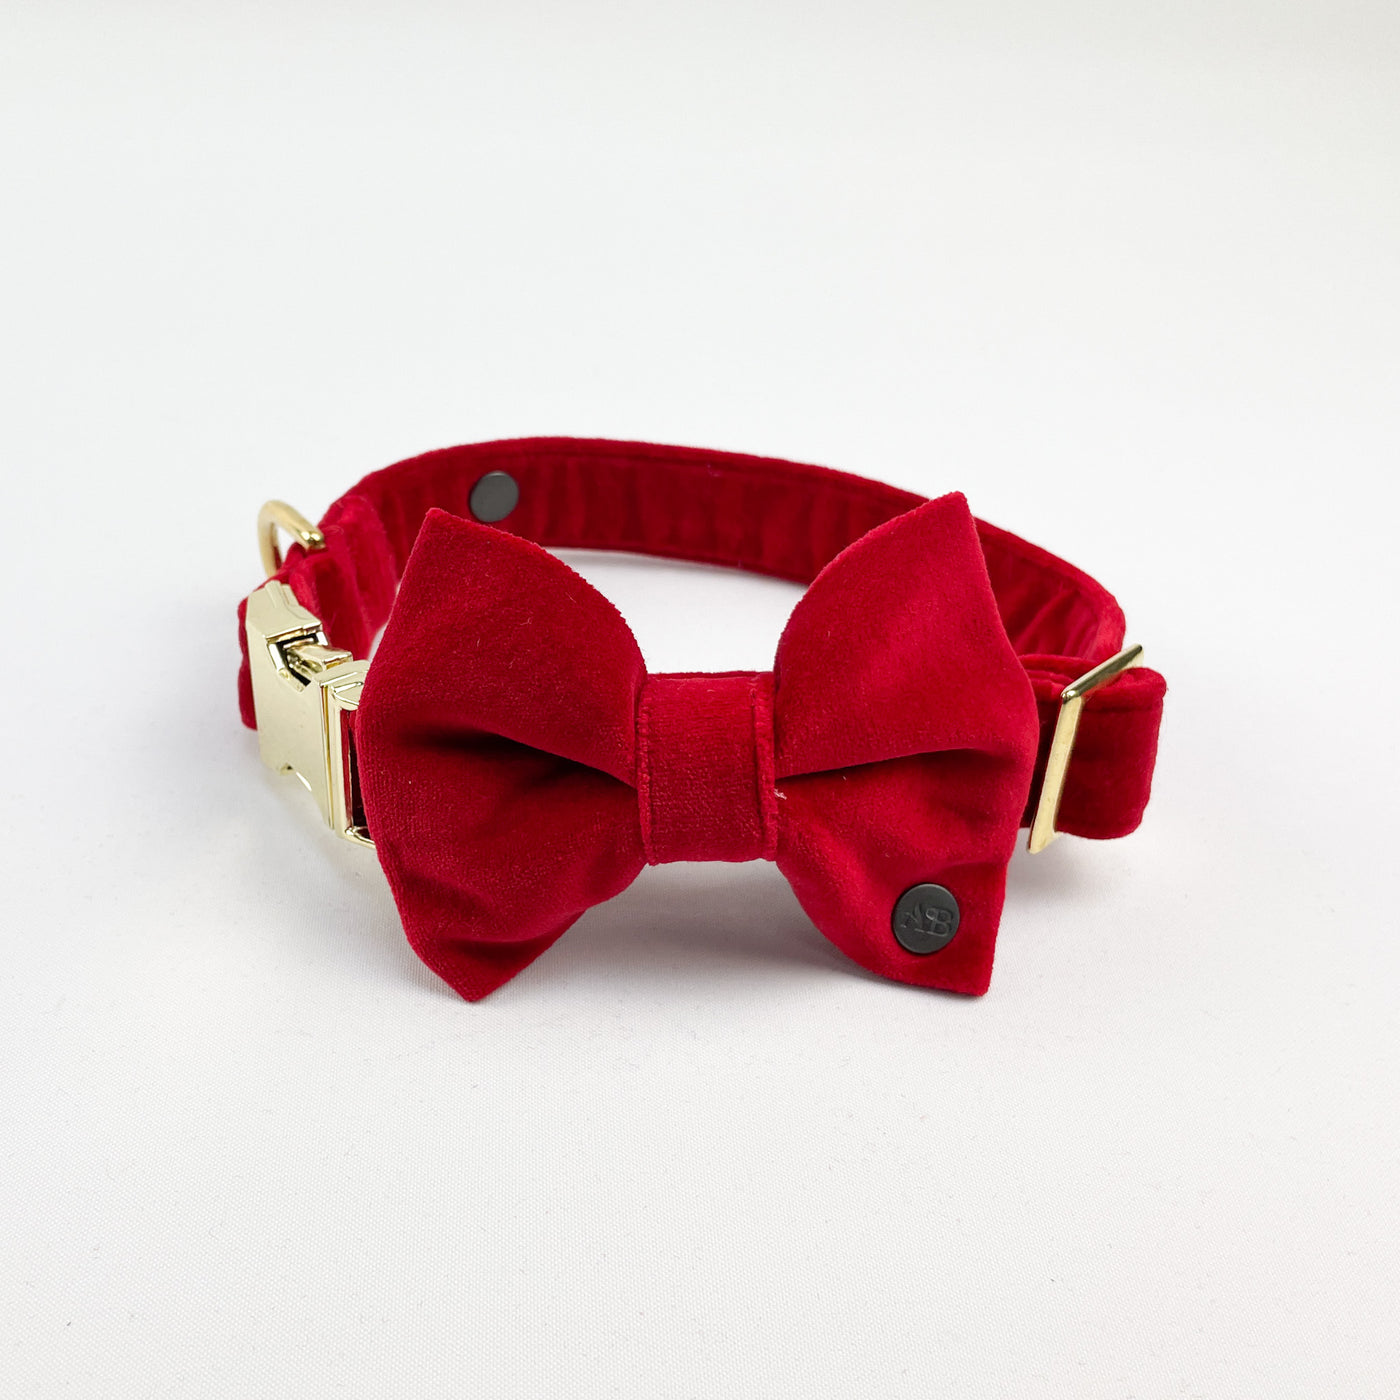 Red velvet dog collar and dog bow tie